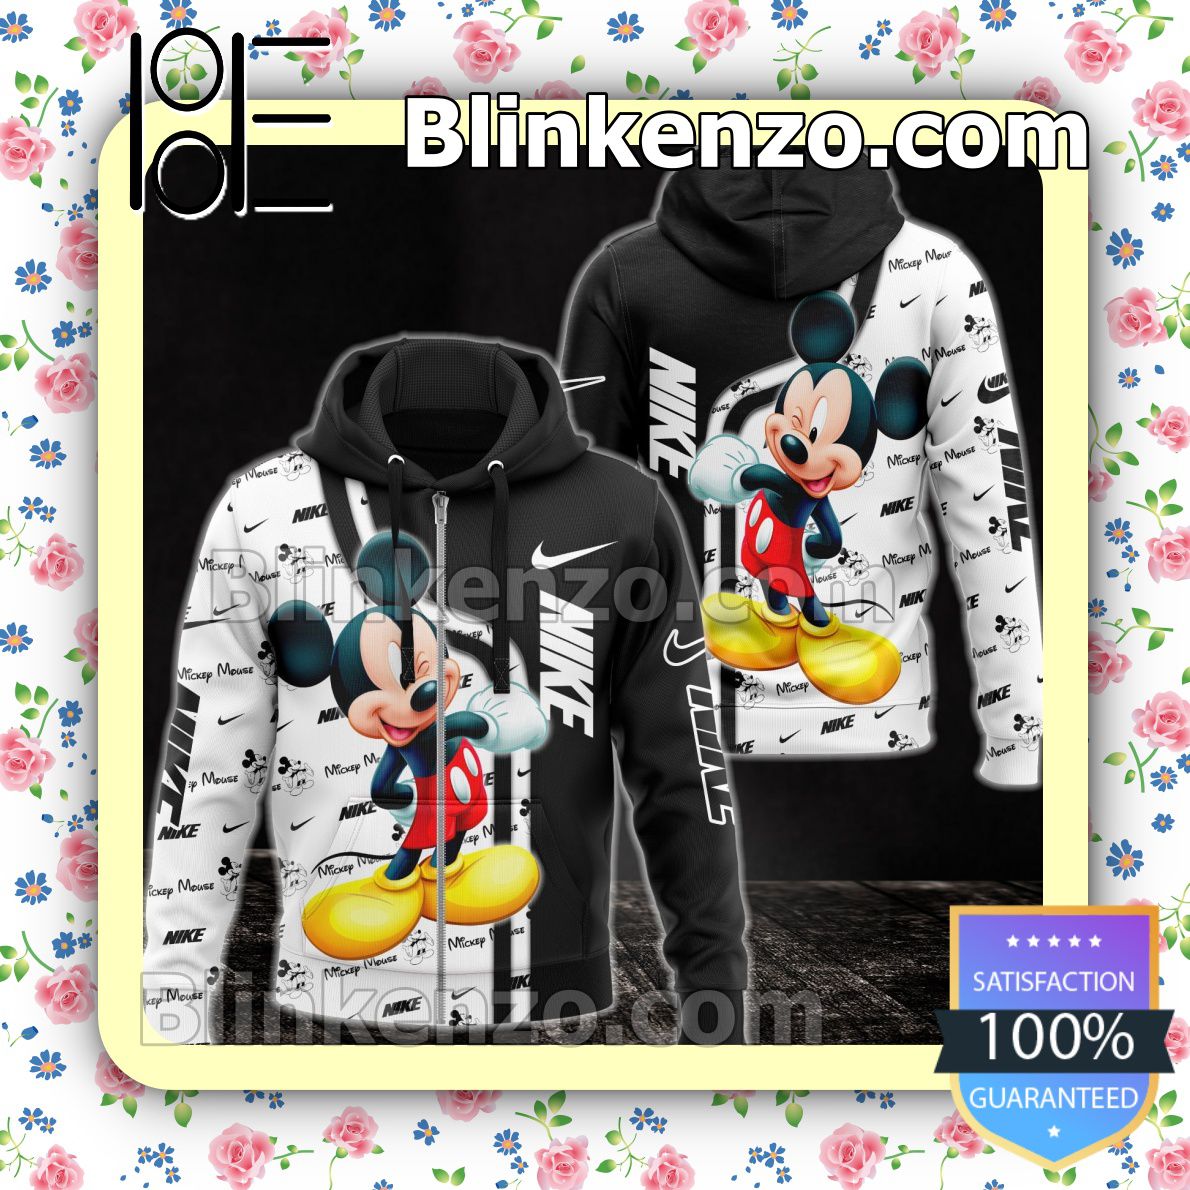 Great Quality Nike With Mickey Mouse Black And White Full-Zip Hooded Fleece Sweatshirt